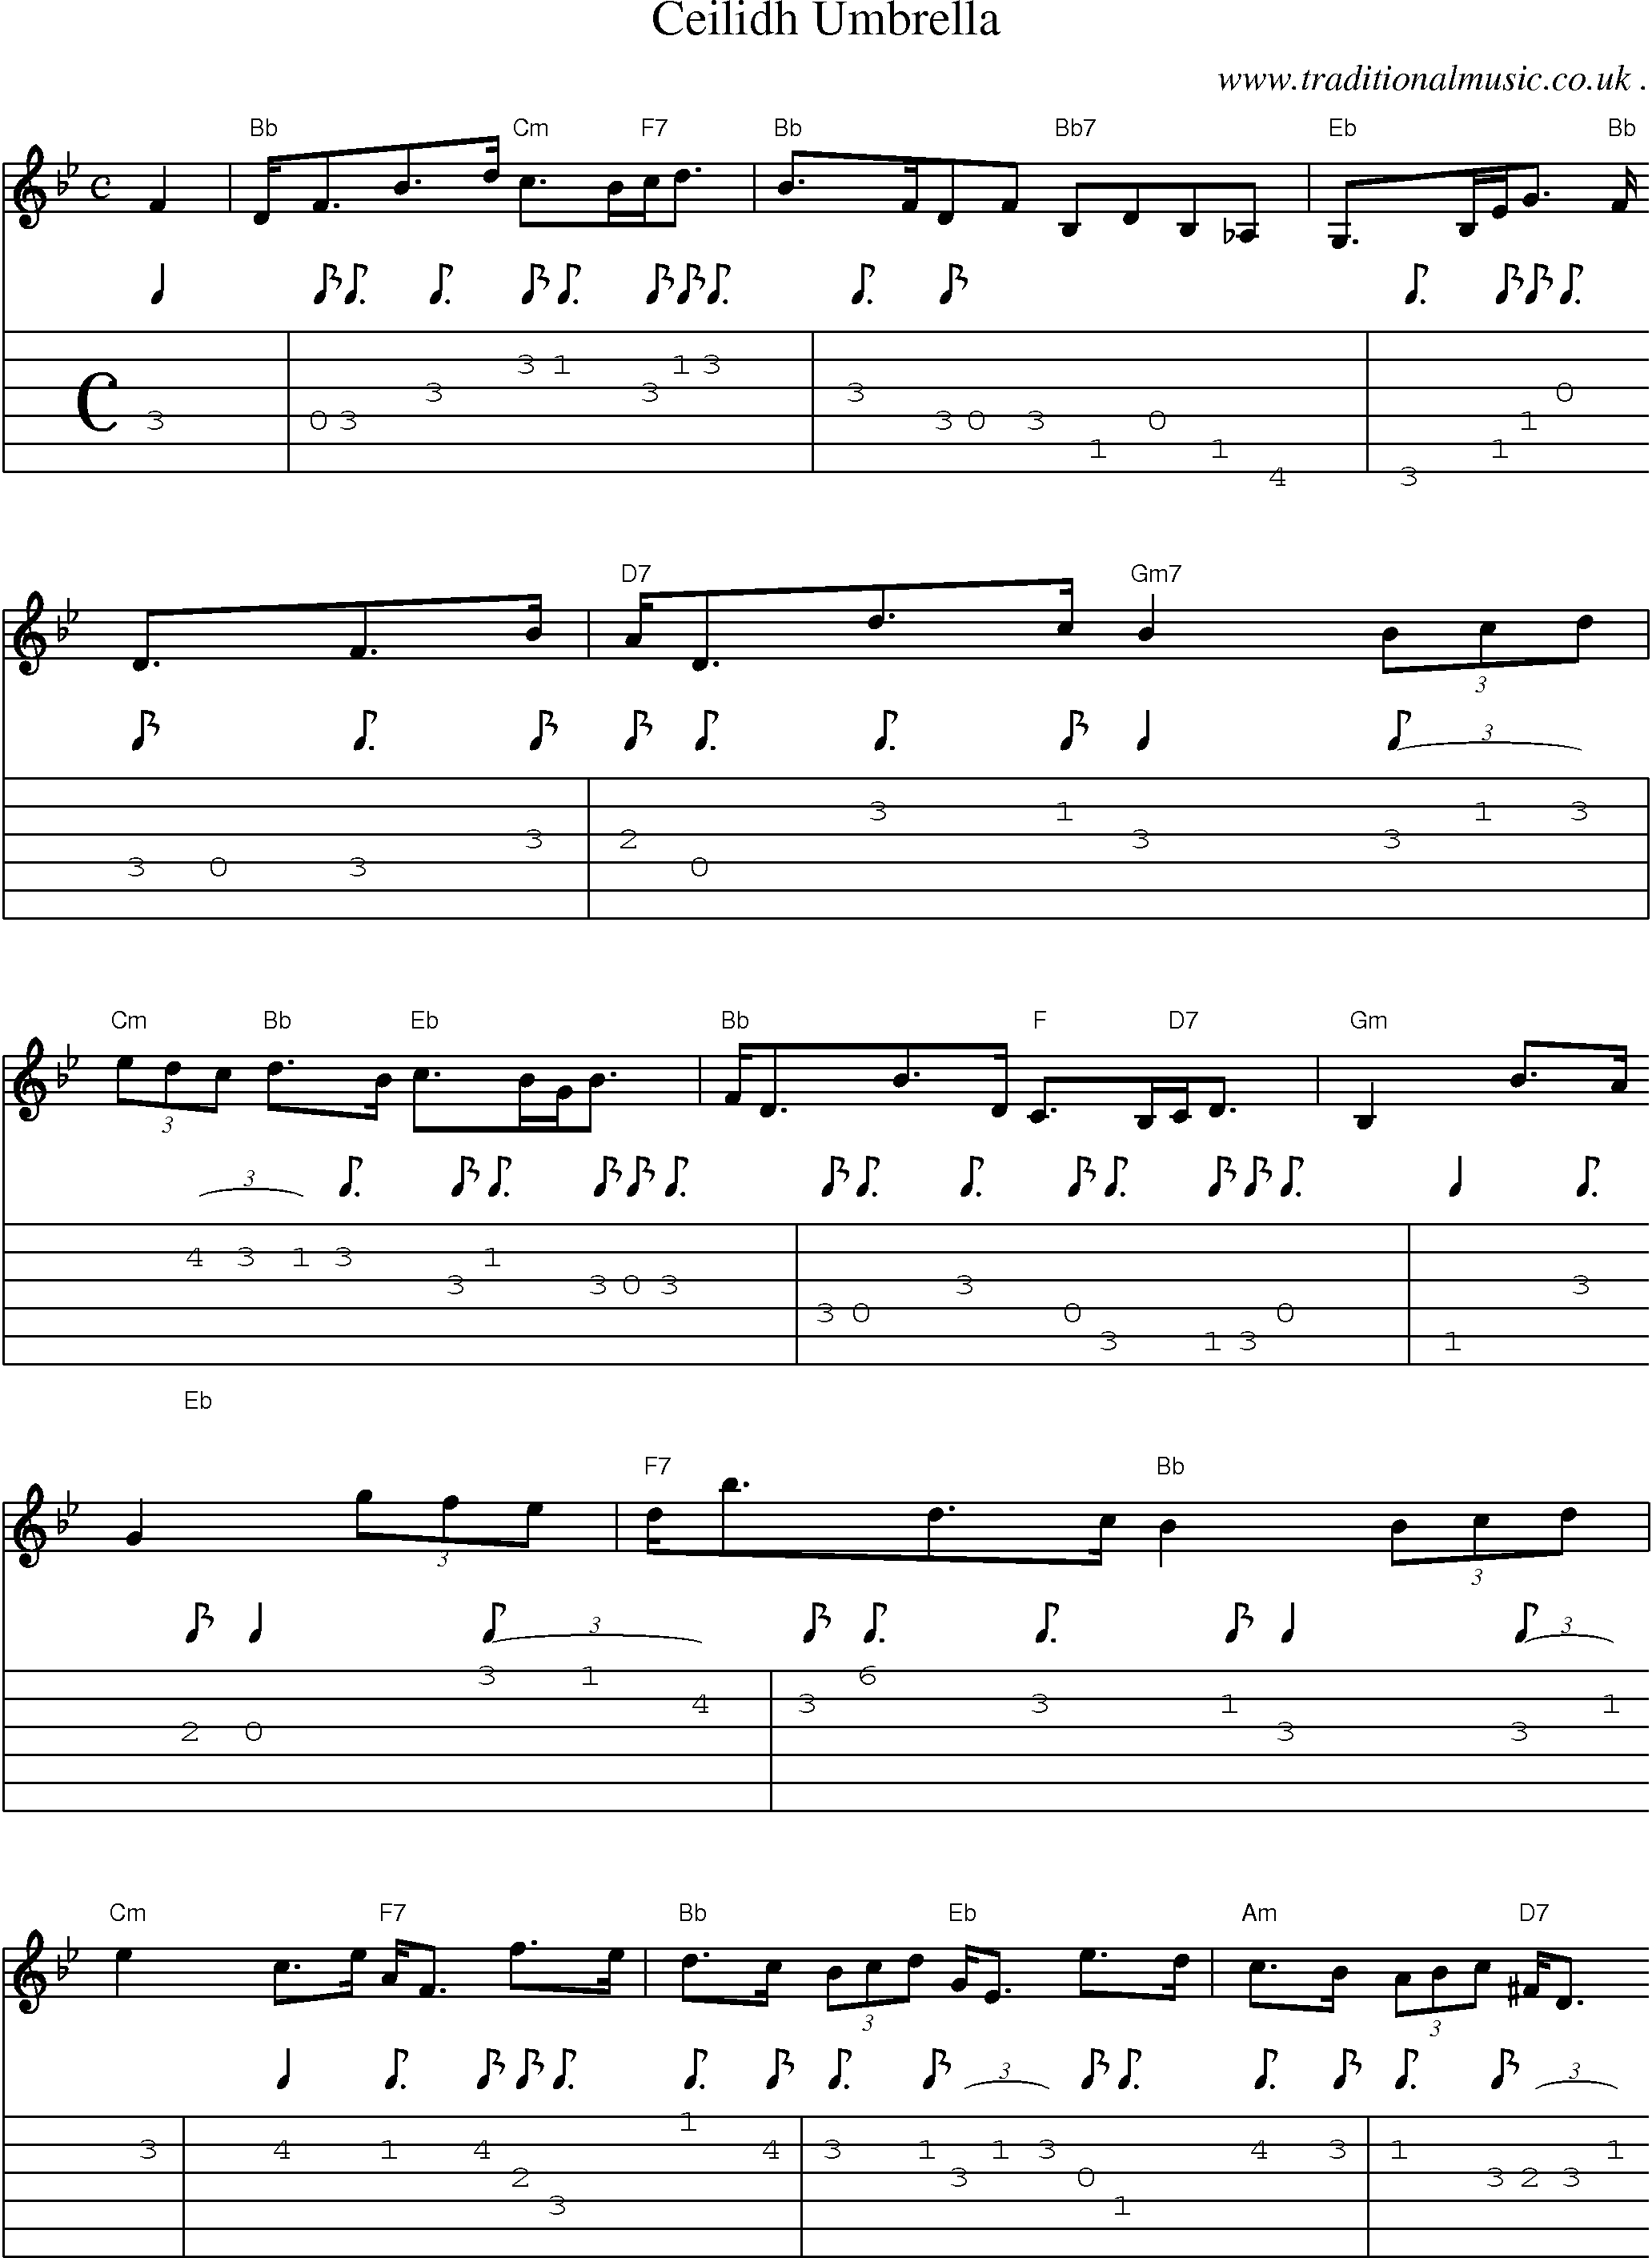 Sheet-music  score, Chords and Guitar Tabs for Ceilidh Umbrella